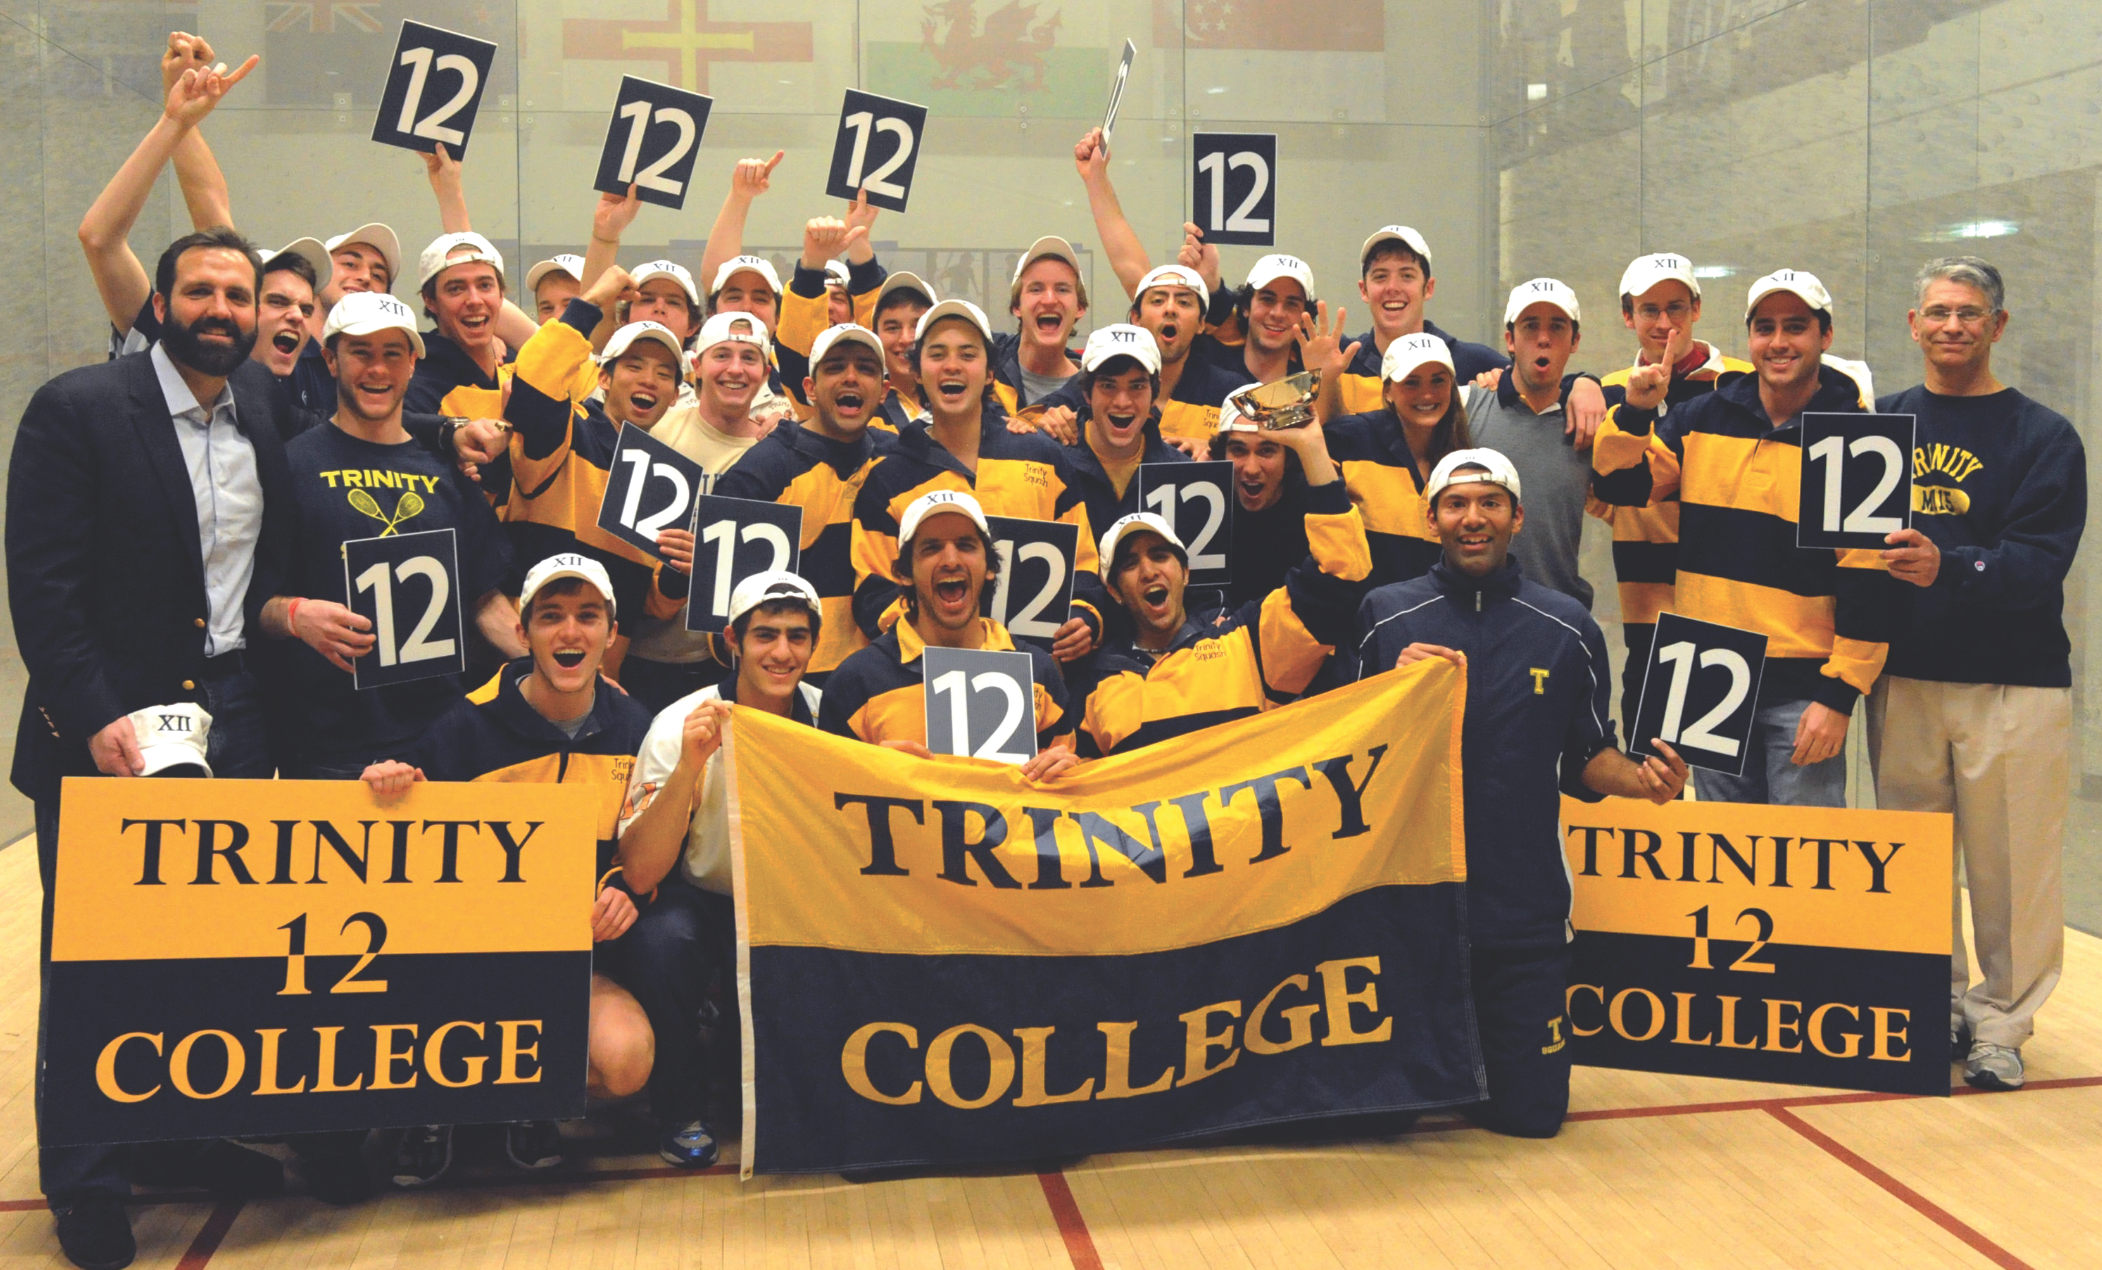 On the men’s side, the Trinity Bantams (Above) captured their 12th consecutive men’s championship by stopping host Yale, 6-3, on finals Sunday. The win extended Trinity’s unbeaten match string to 224.